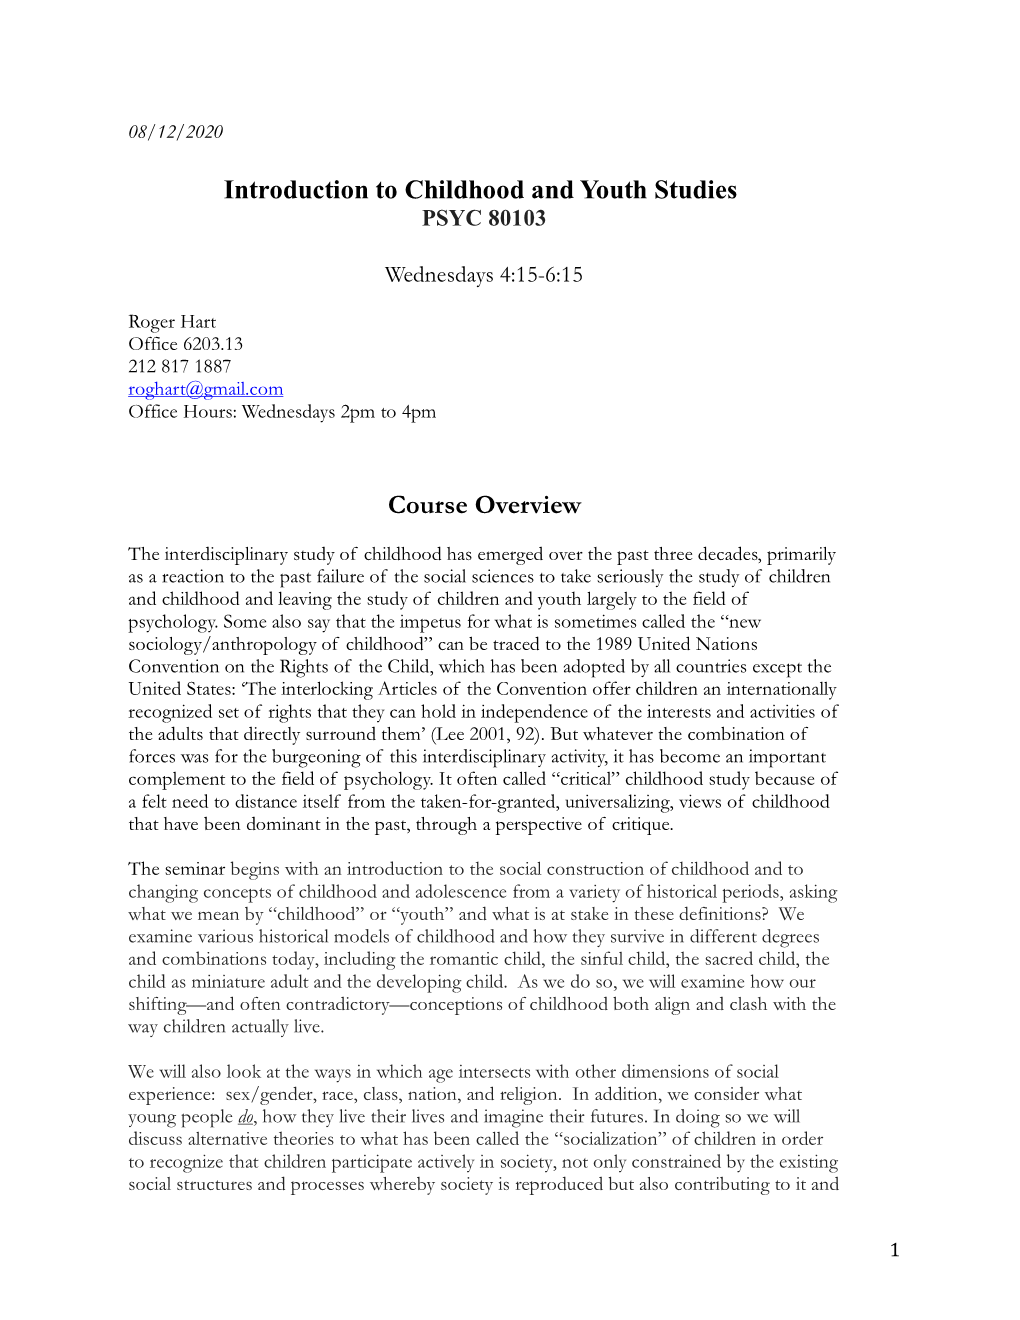 Introduction to Childhood and Youth Studies Course Overview